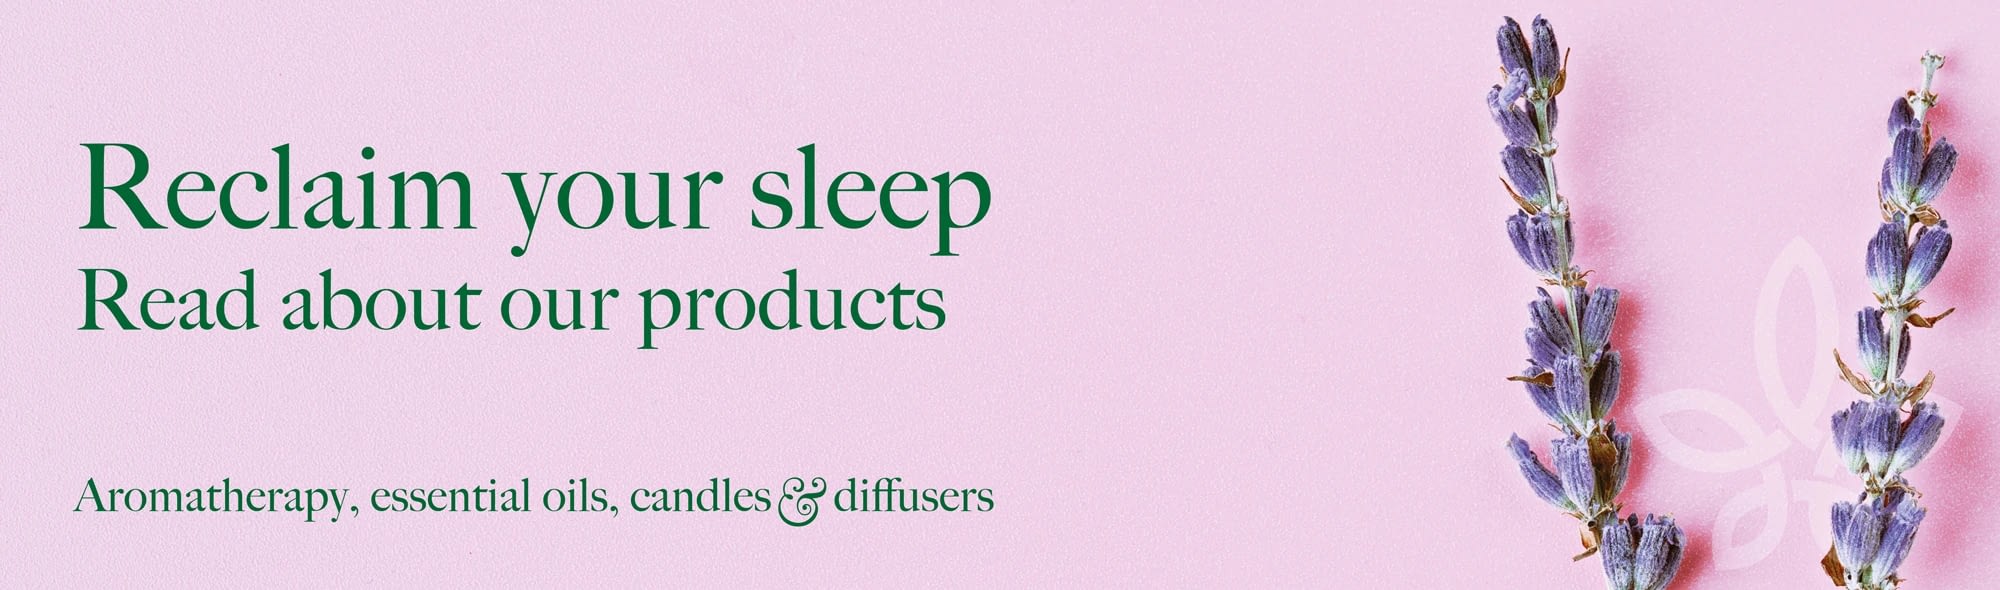 Sleep aid products - Aromatherapy, Essential Oils, Candles Diffusers